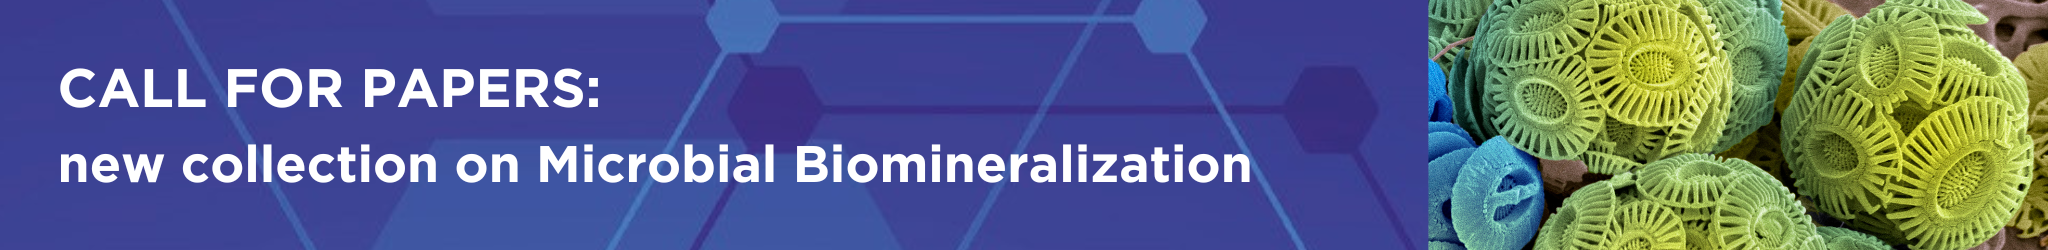 Call for Papers GBI Microbial Biomineralization